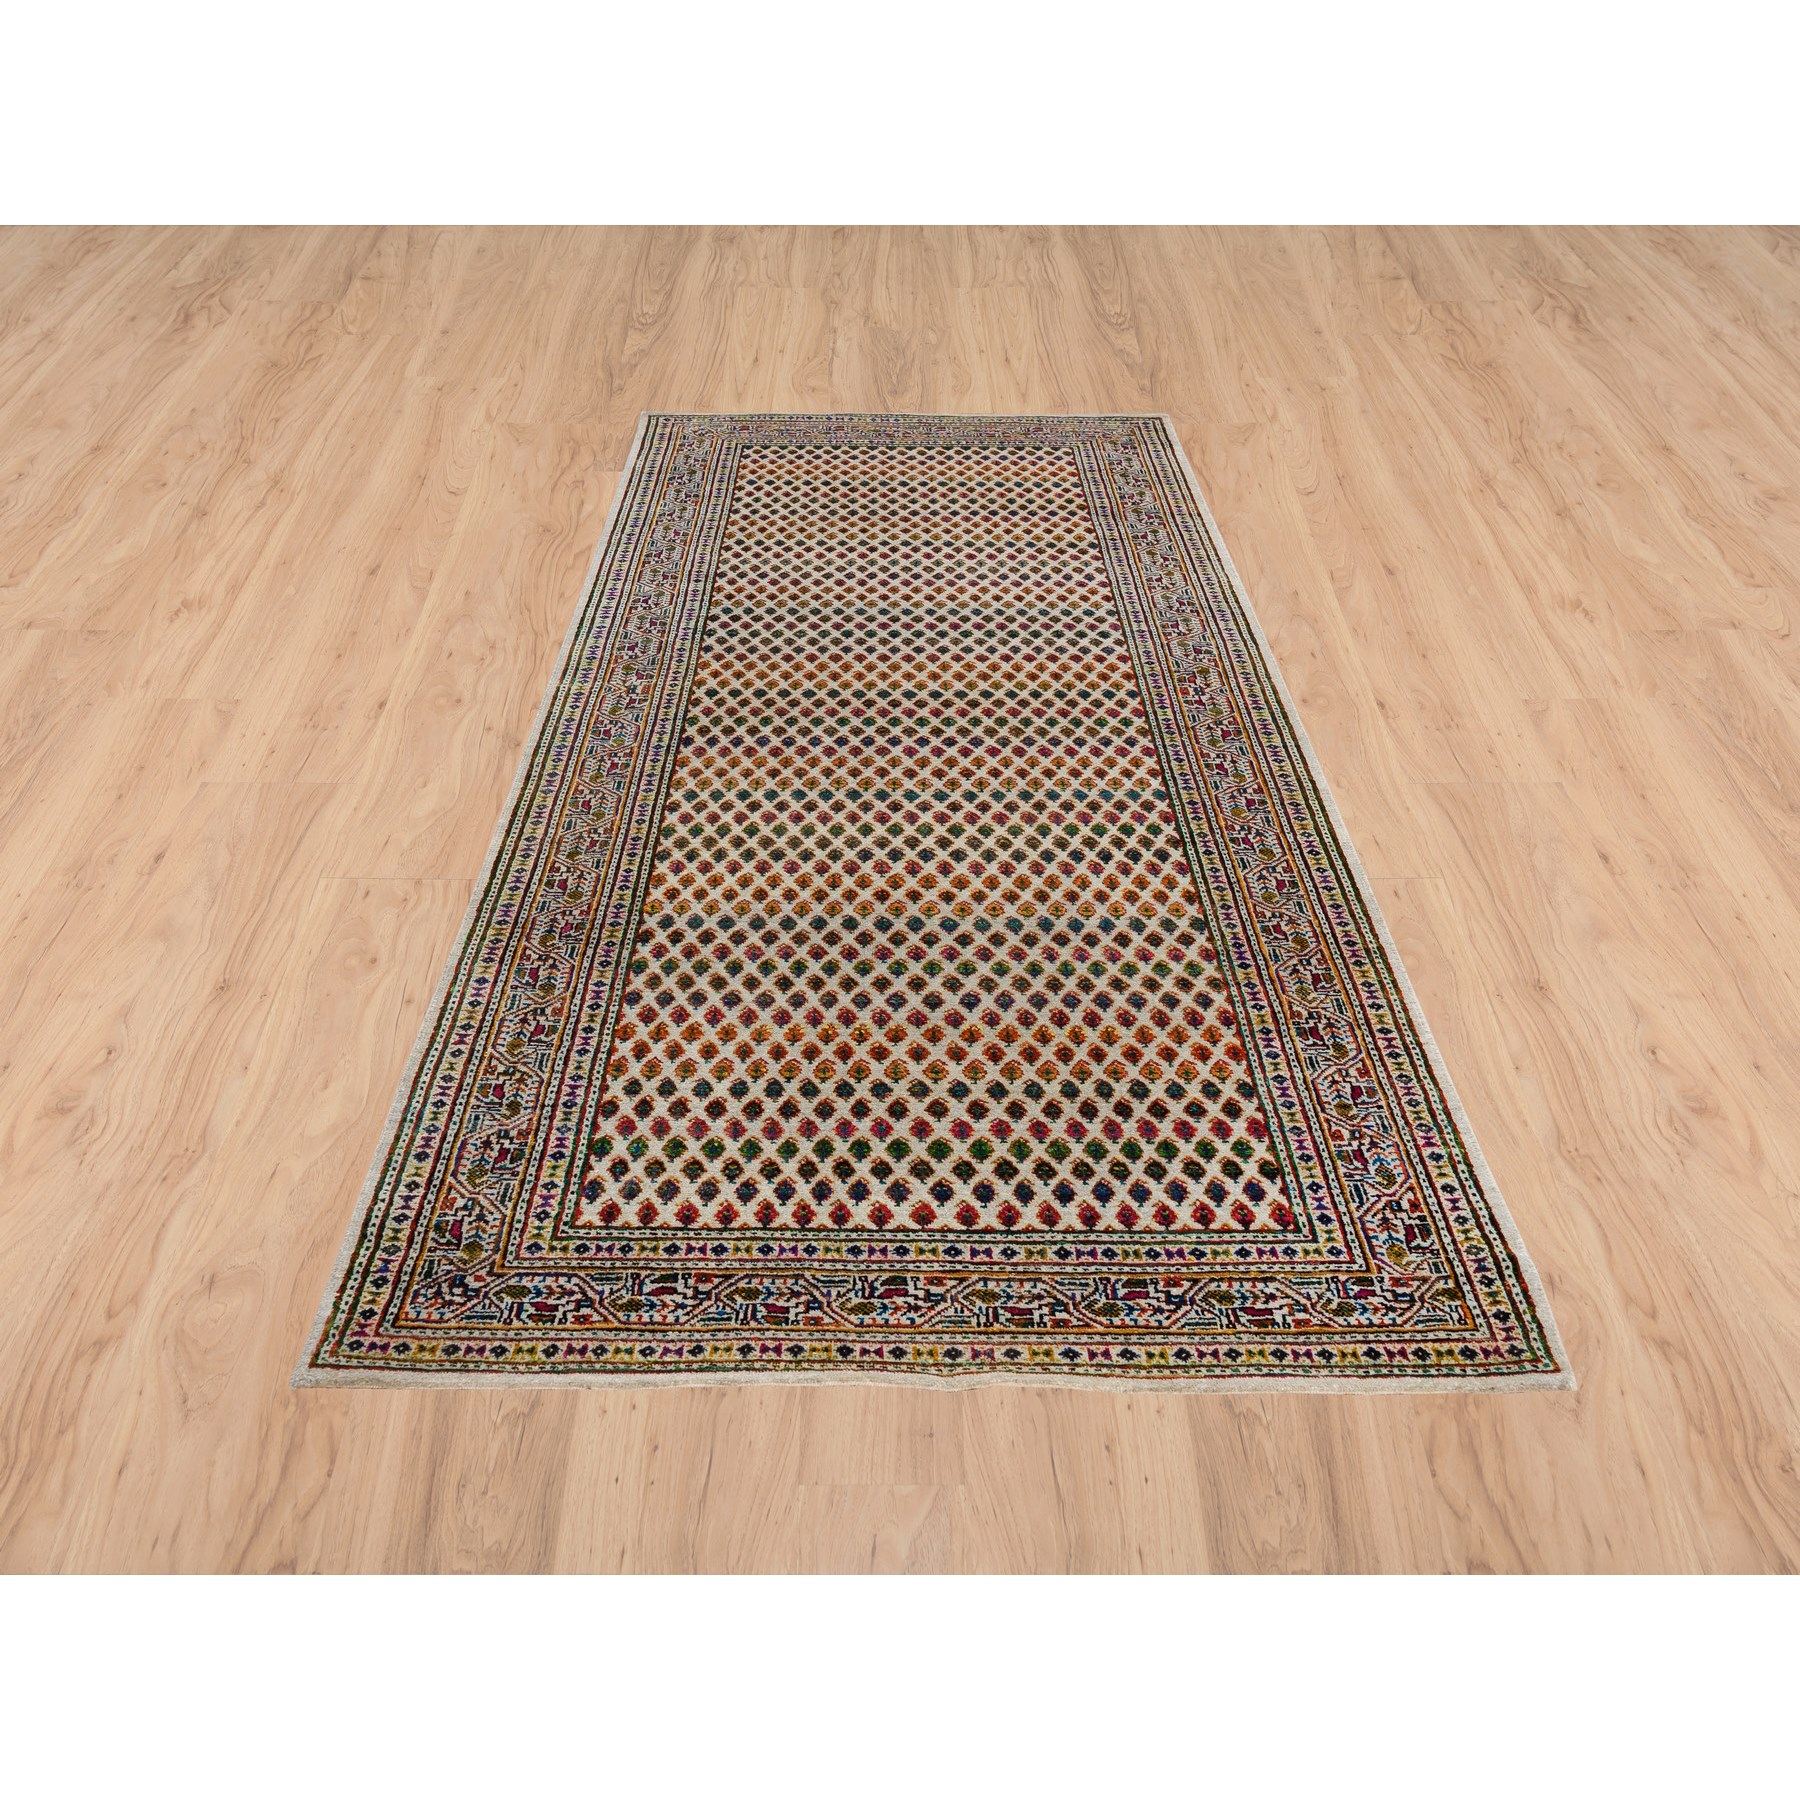 4'x10' Hand Woven Beige Sarouk Mir Inspired With Repetitive Boteh Design Colorful Wool And Sari Silk Oriental Wide Runner Rug 